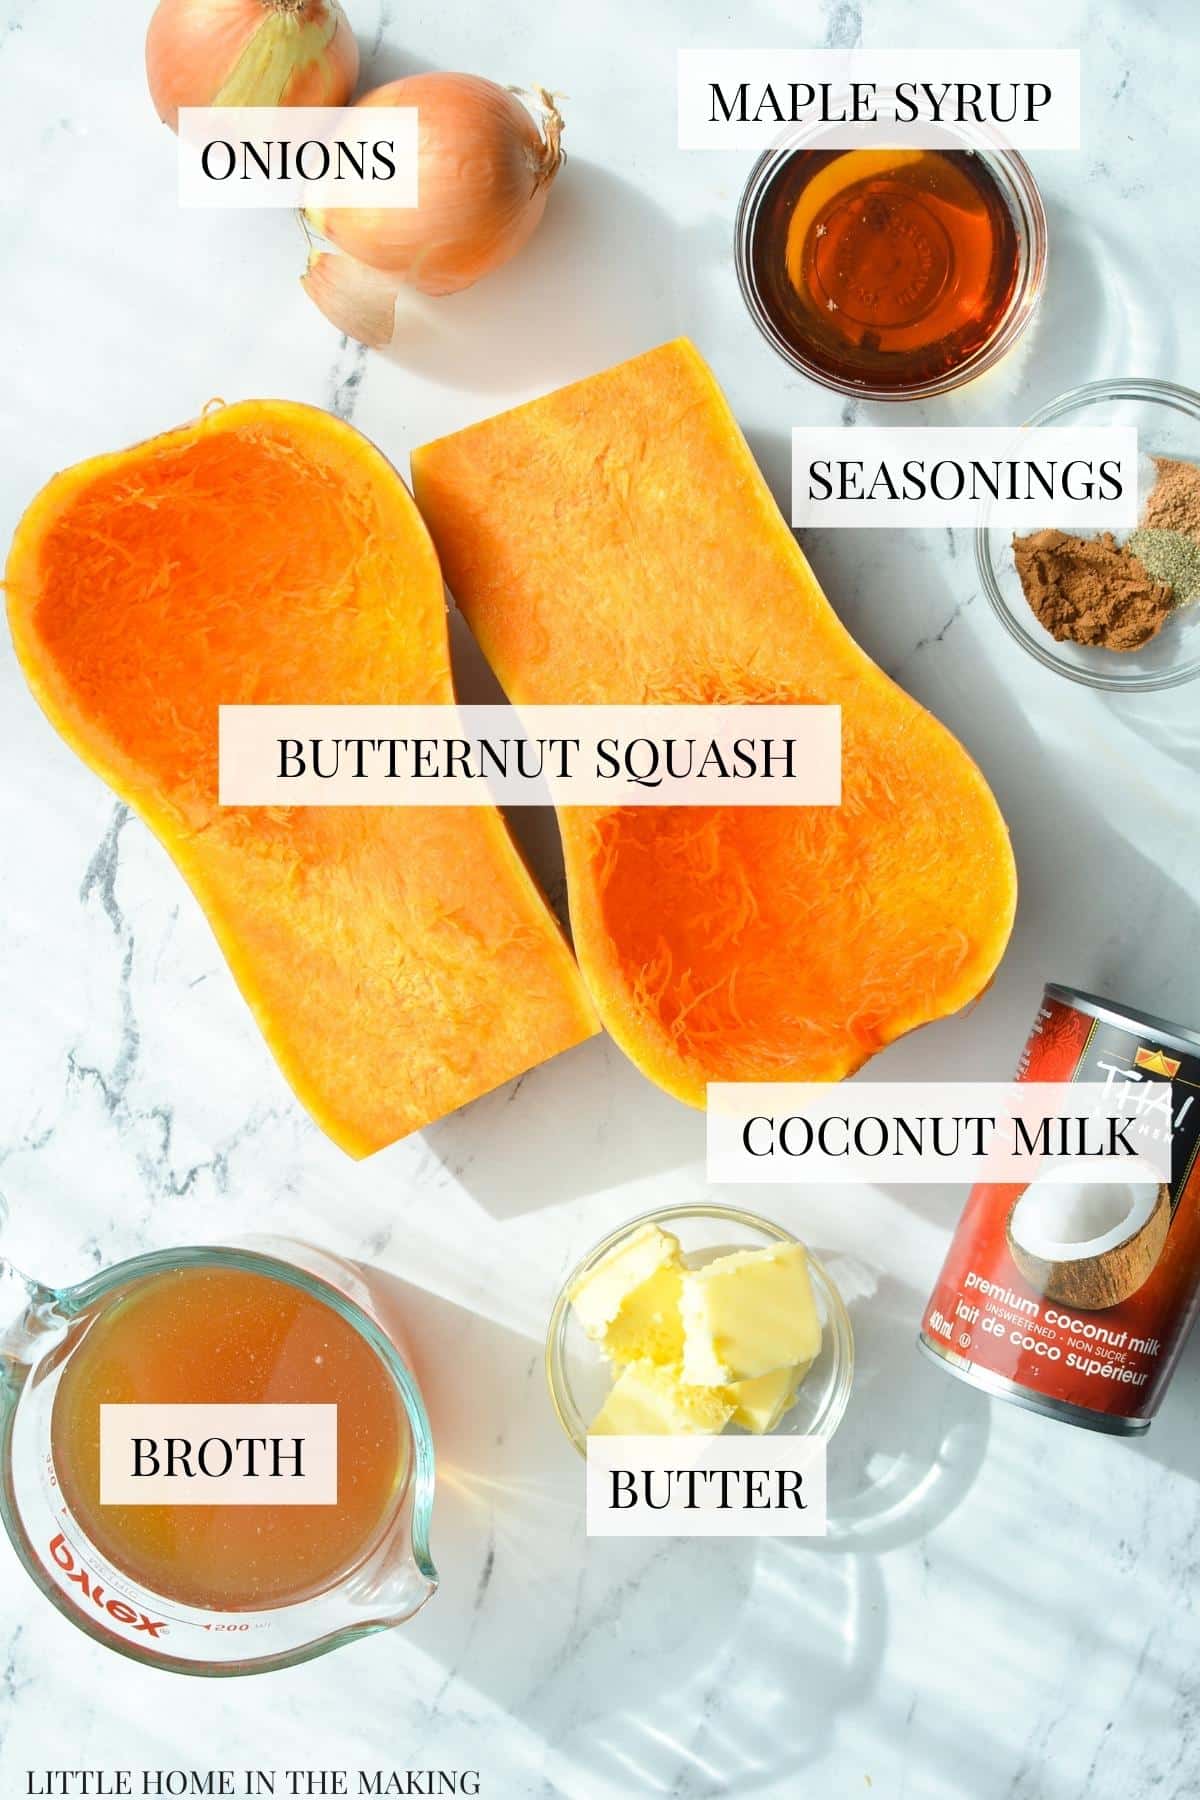 The ingredients needed to make butternut squash soup, including butter, broth, butternut squash, onions, maple syrup, and coconut milk.